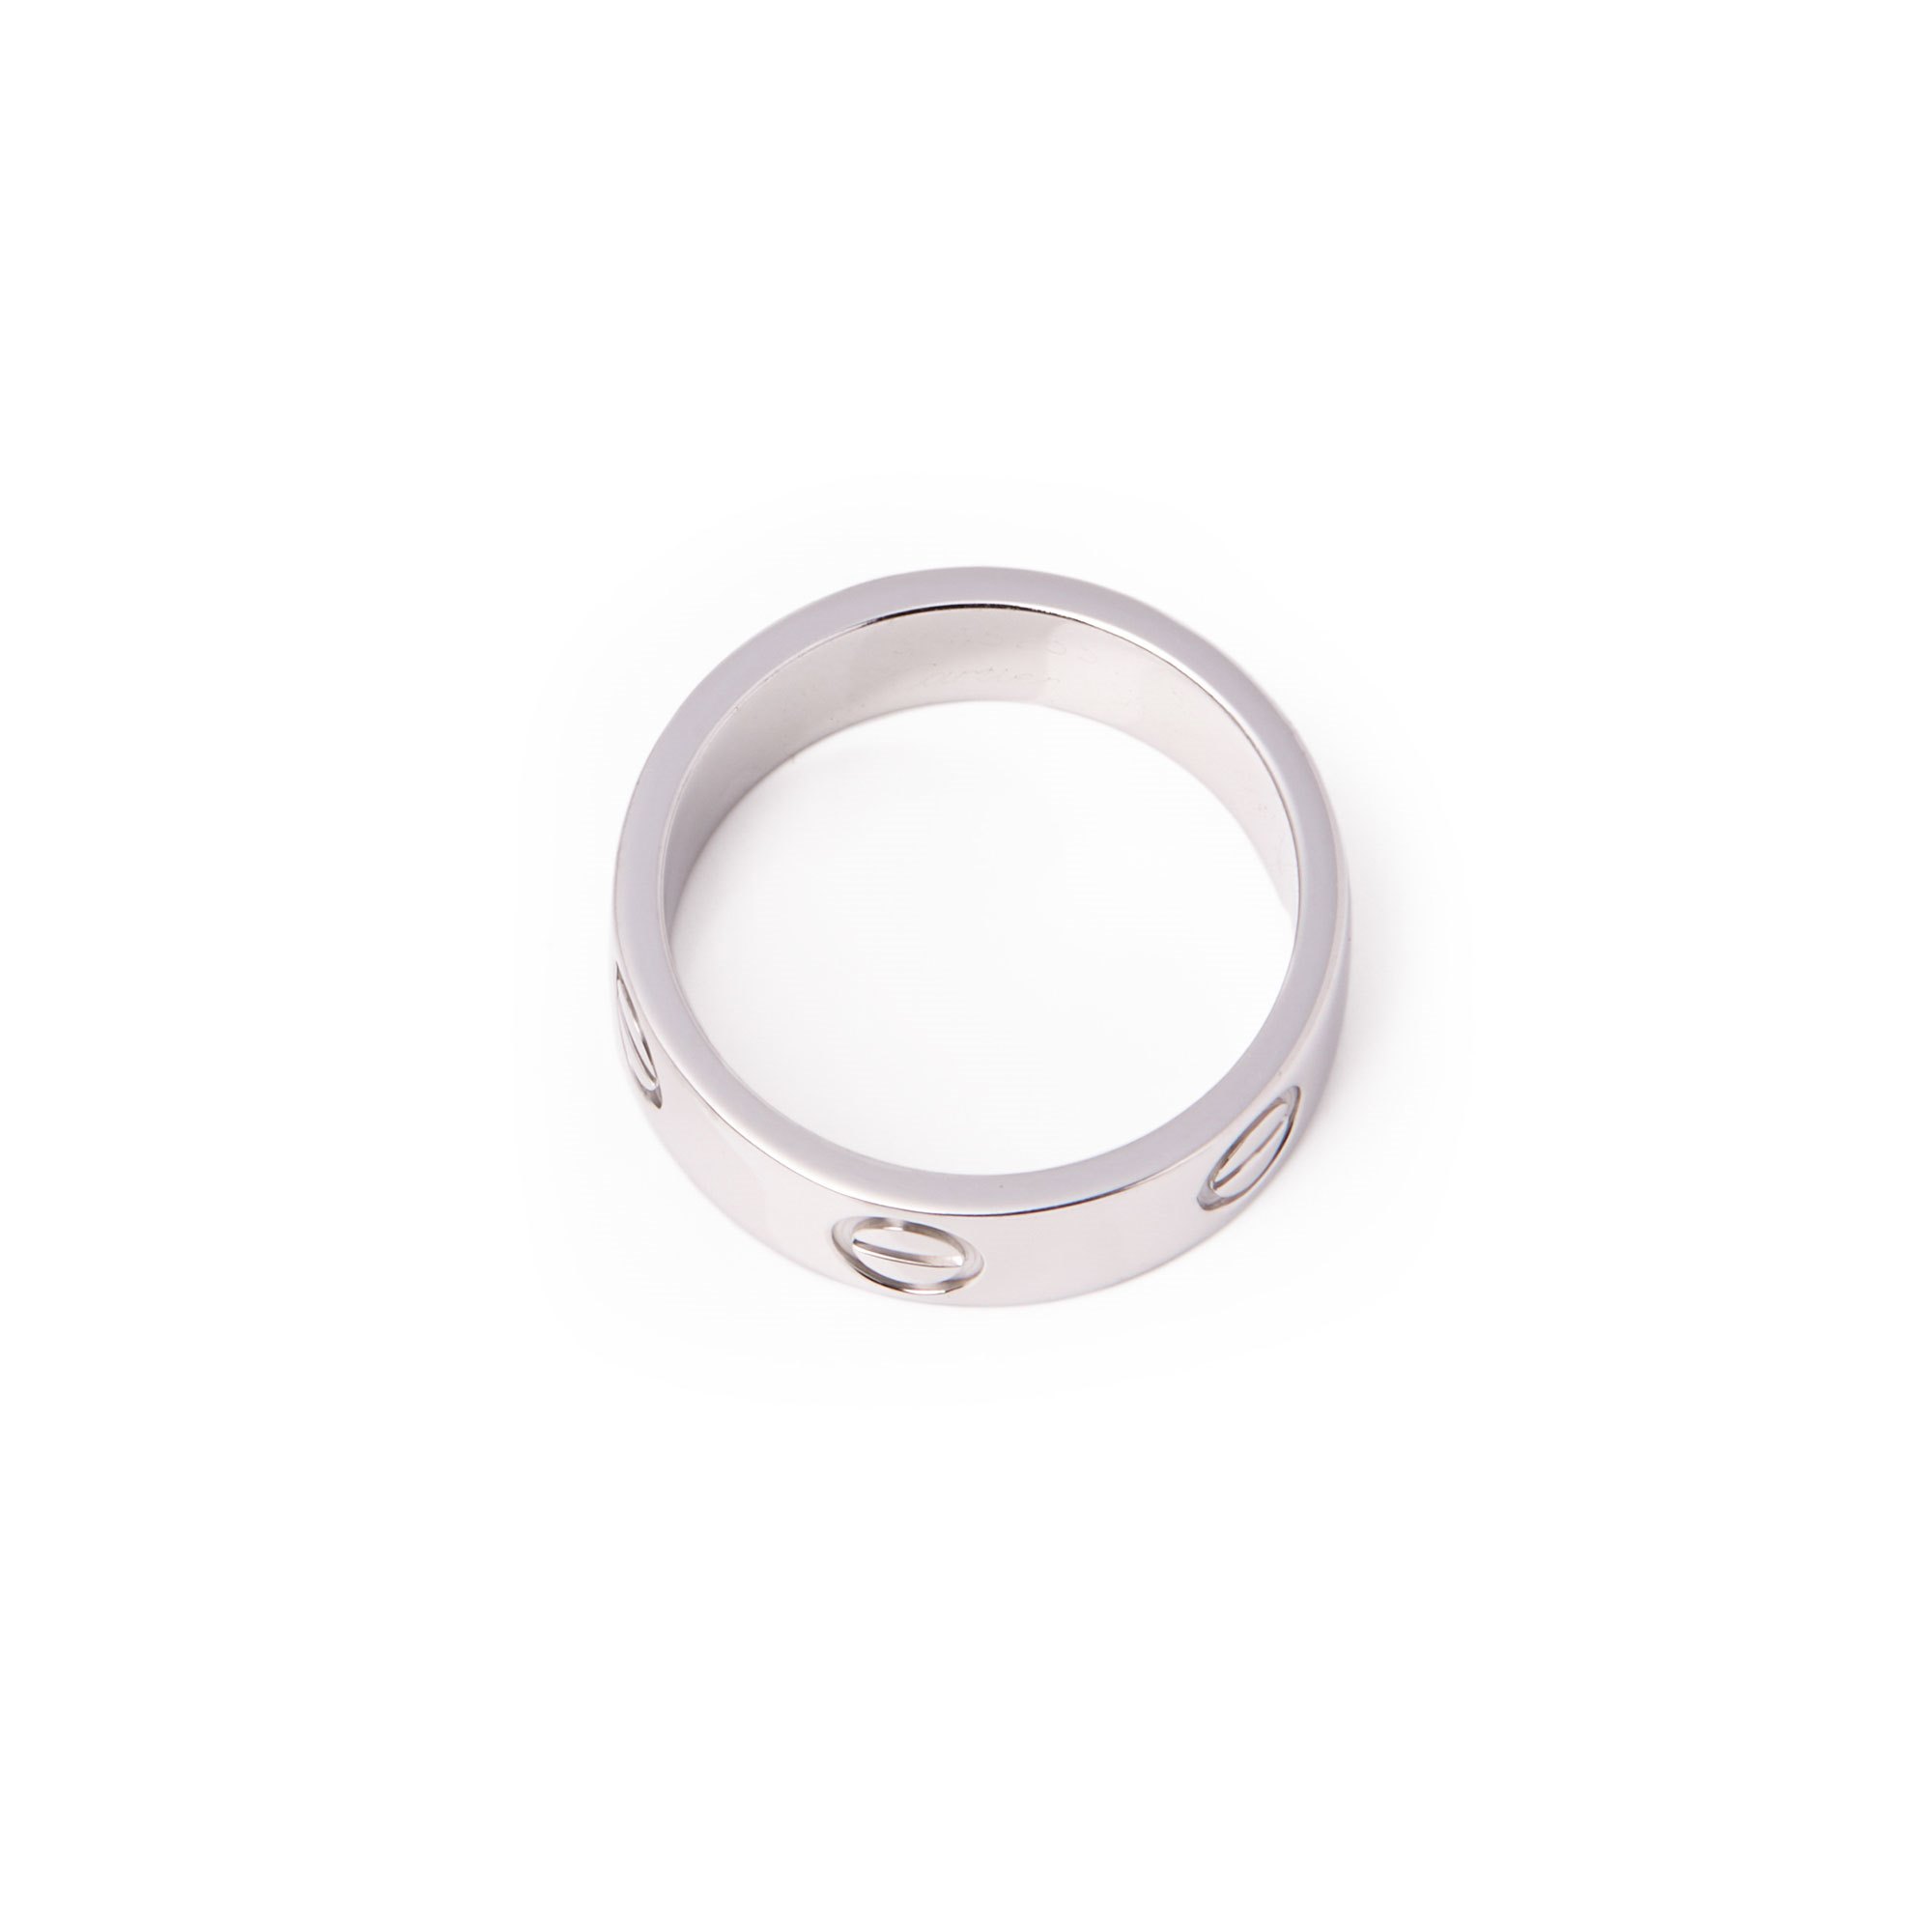 Cartier Love 18ct White Gold Band Ring